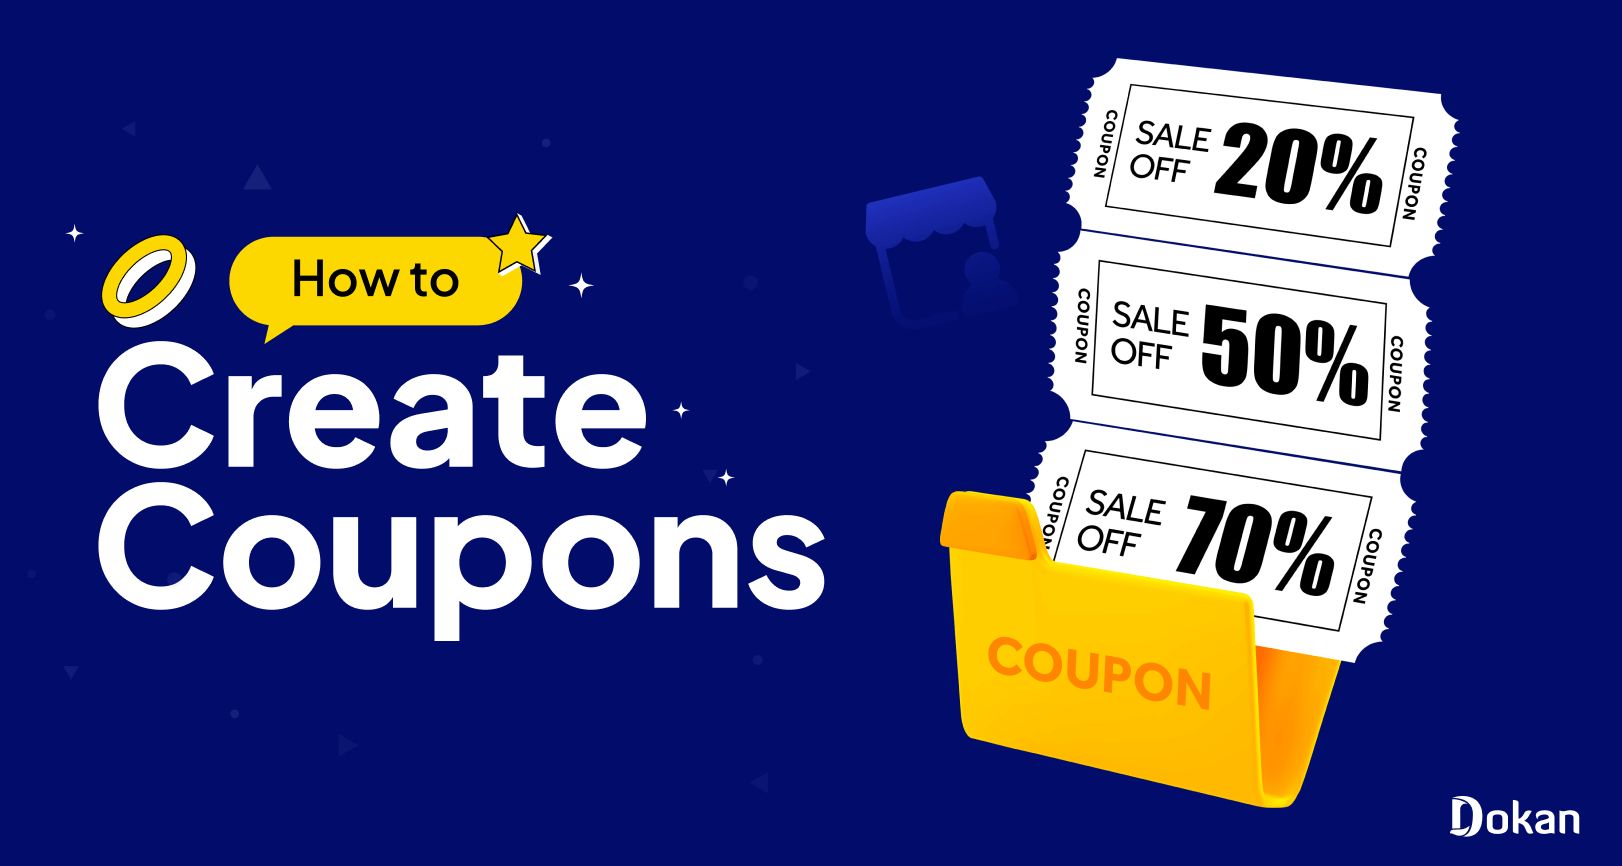 This is the feature image of the blog - How to Create Coupons in Dokan